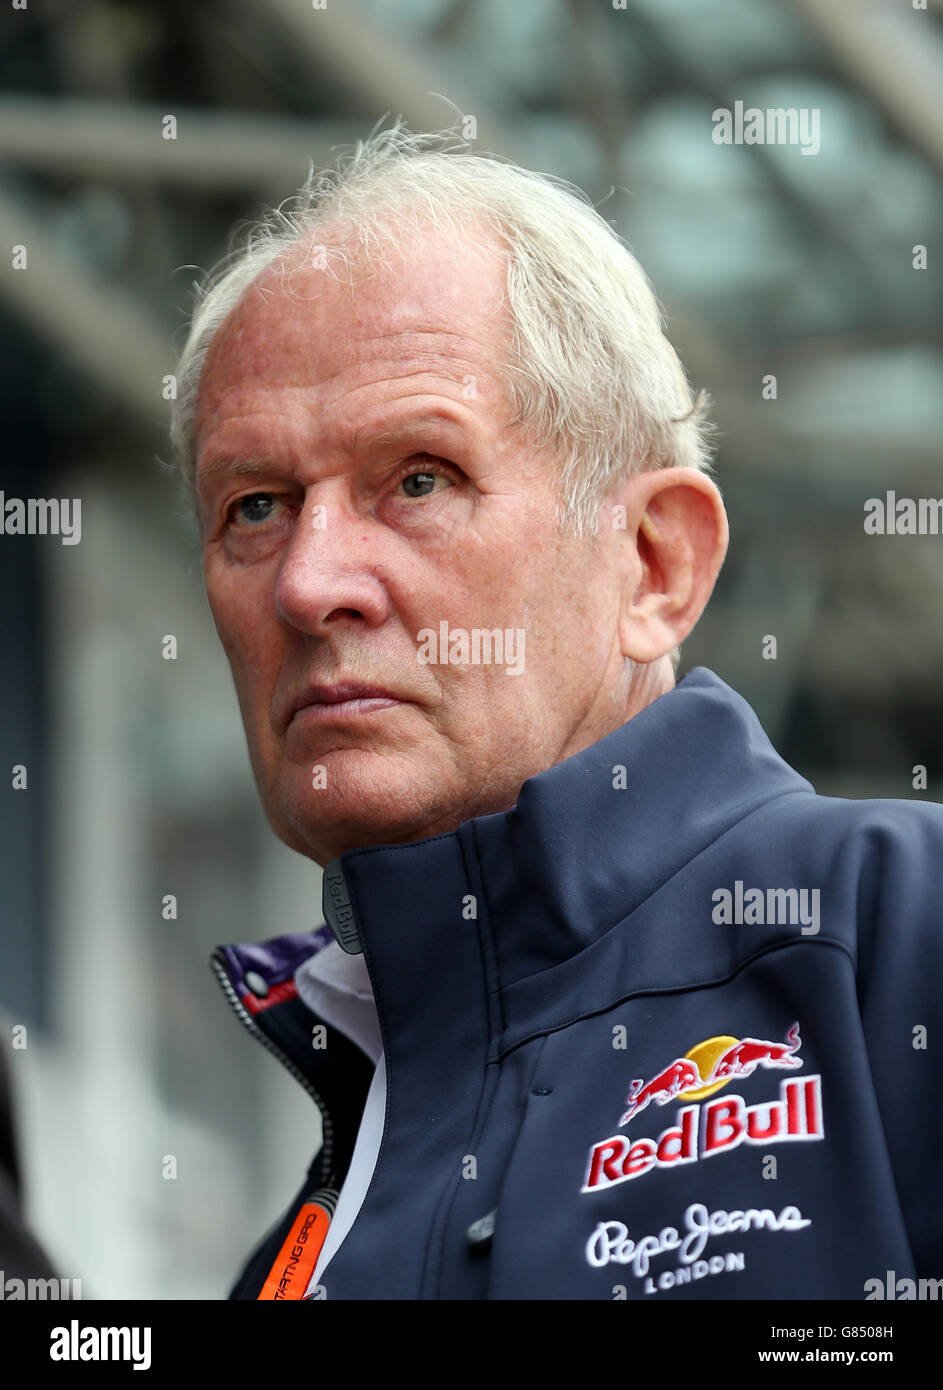 Red Bull's Helmut Marko during the 2015 British Grand Prix at Silverstone Circuit, Towcester. PRESS ASSOCIATION Photo. Picture date: Sunday June 5, 2015. See PA story AUTO British. Photo credit should read: David Davies/PA Wire. RESTIRCTIONS: Use subject to restrictions. Editorial use in print media and internet only. No mobile or TV. Commercial use with prior consent.  Use subject to restrictions. Editorial use in print media and internet only. Stock Photo